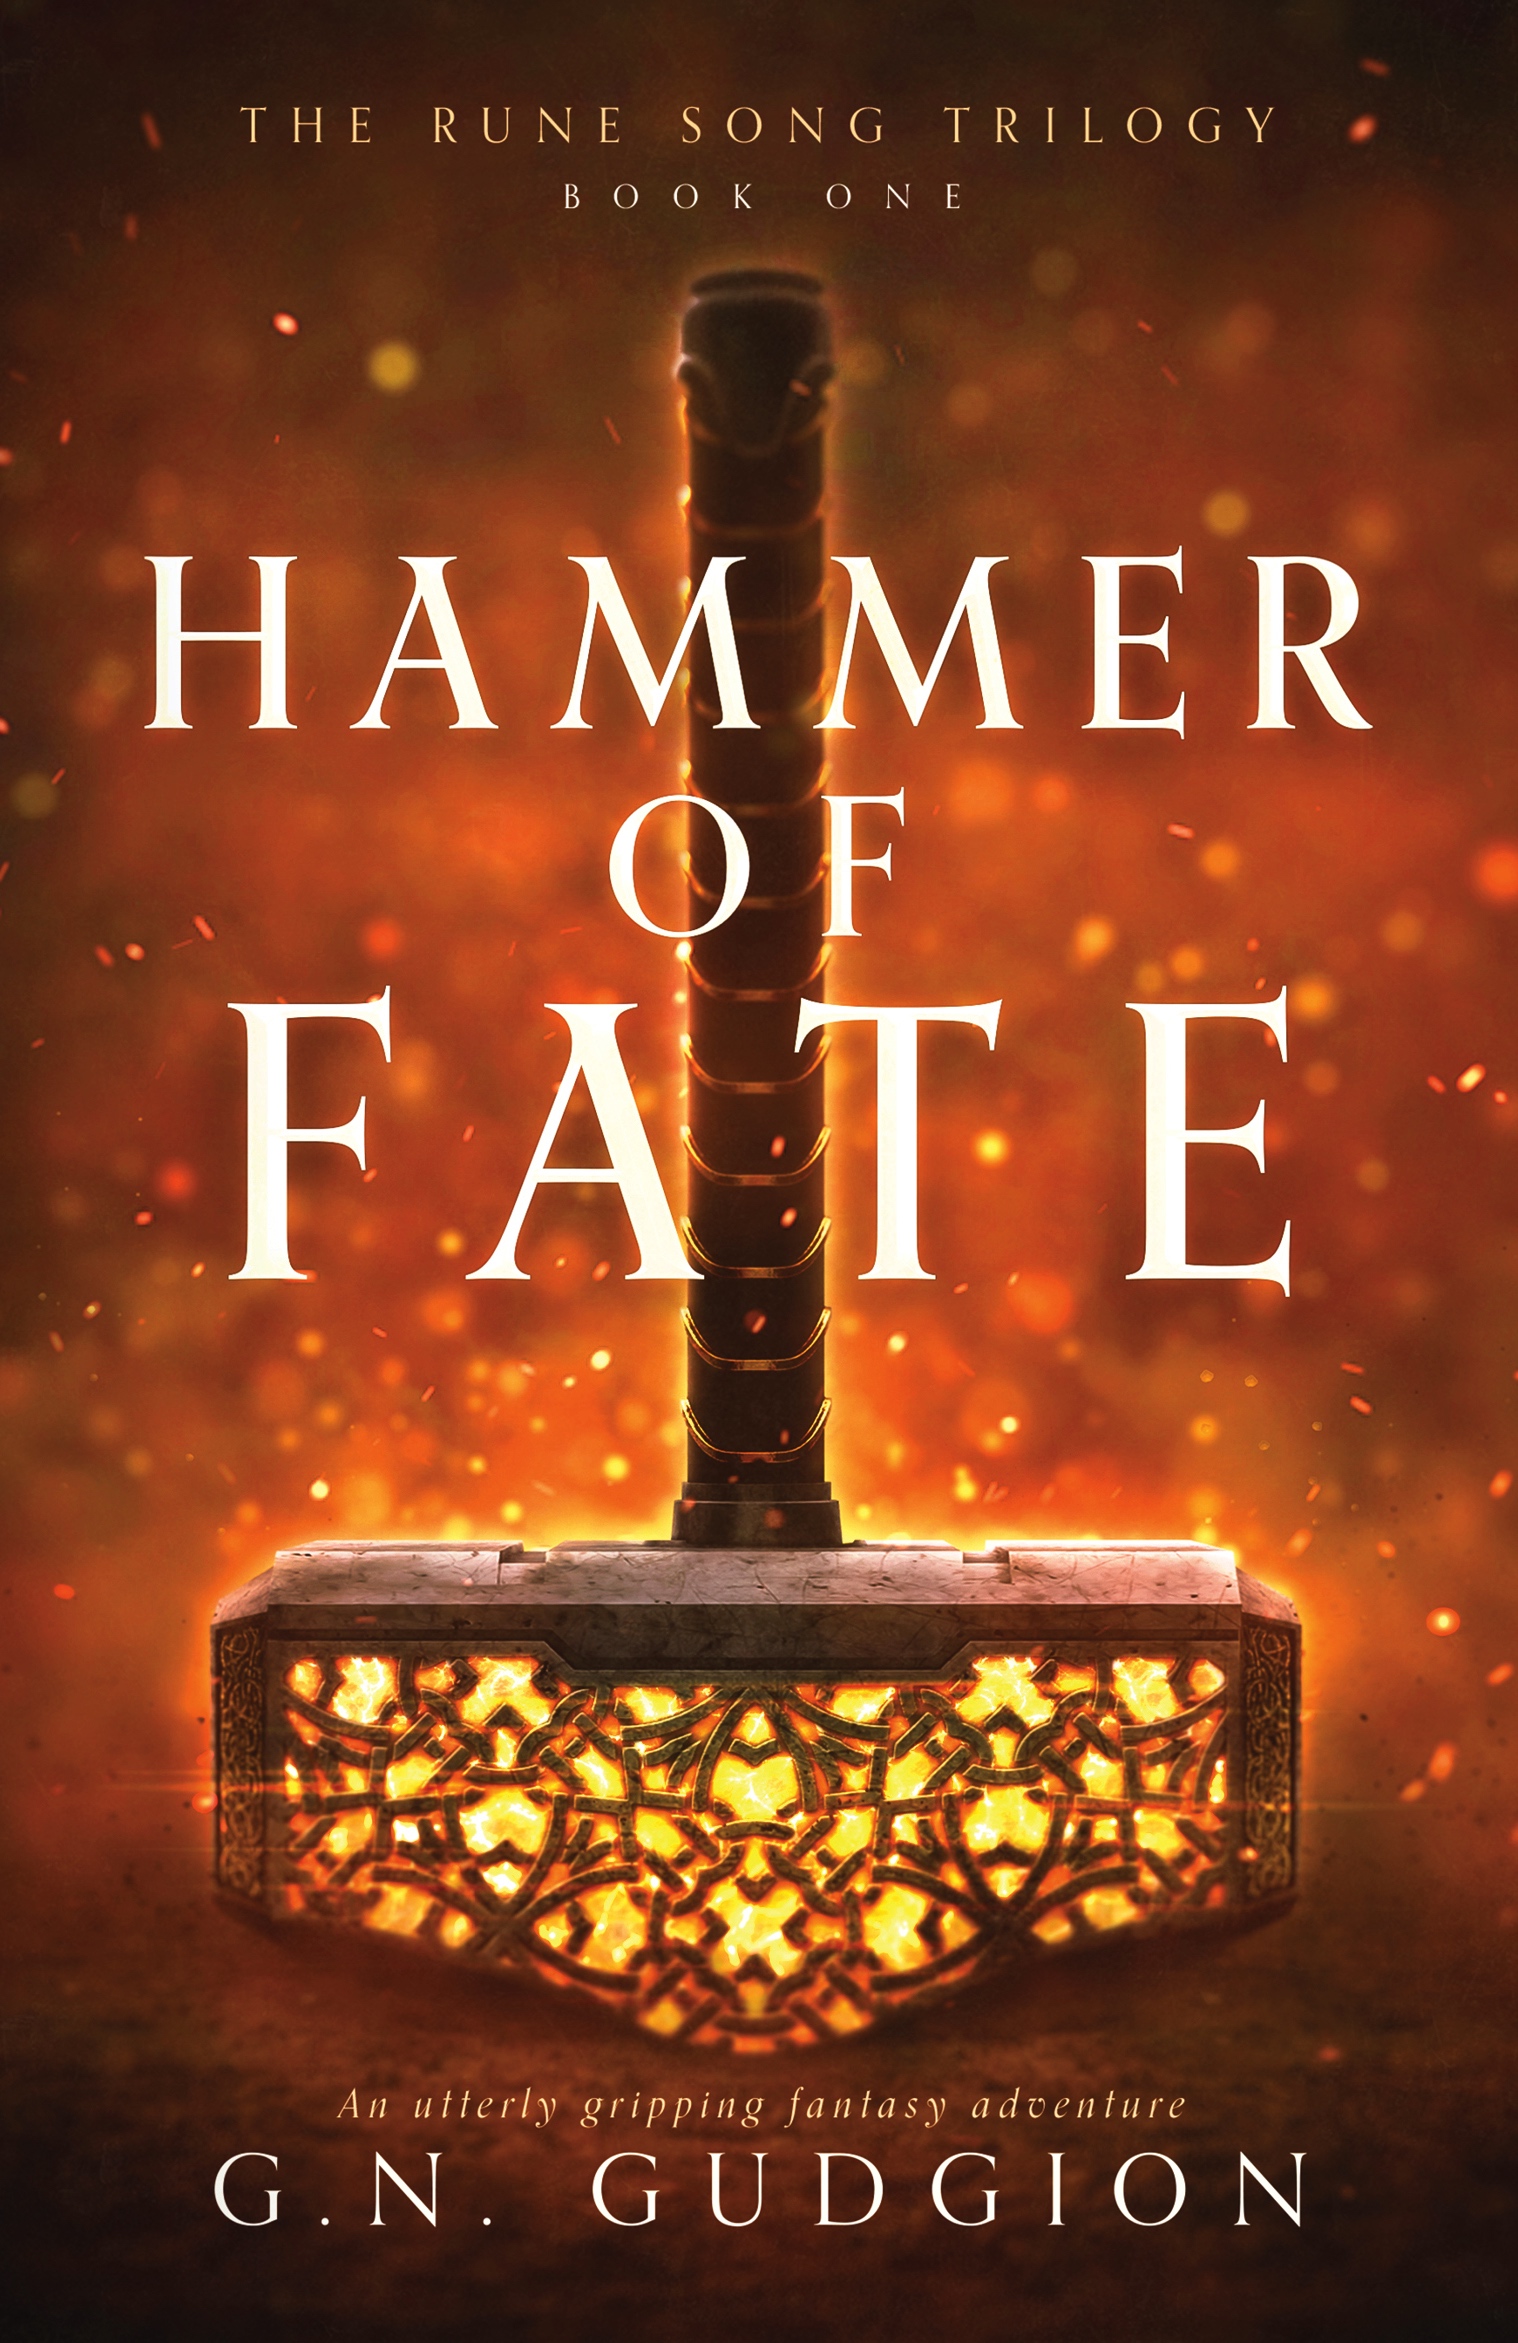 Hammer of Fate